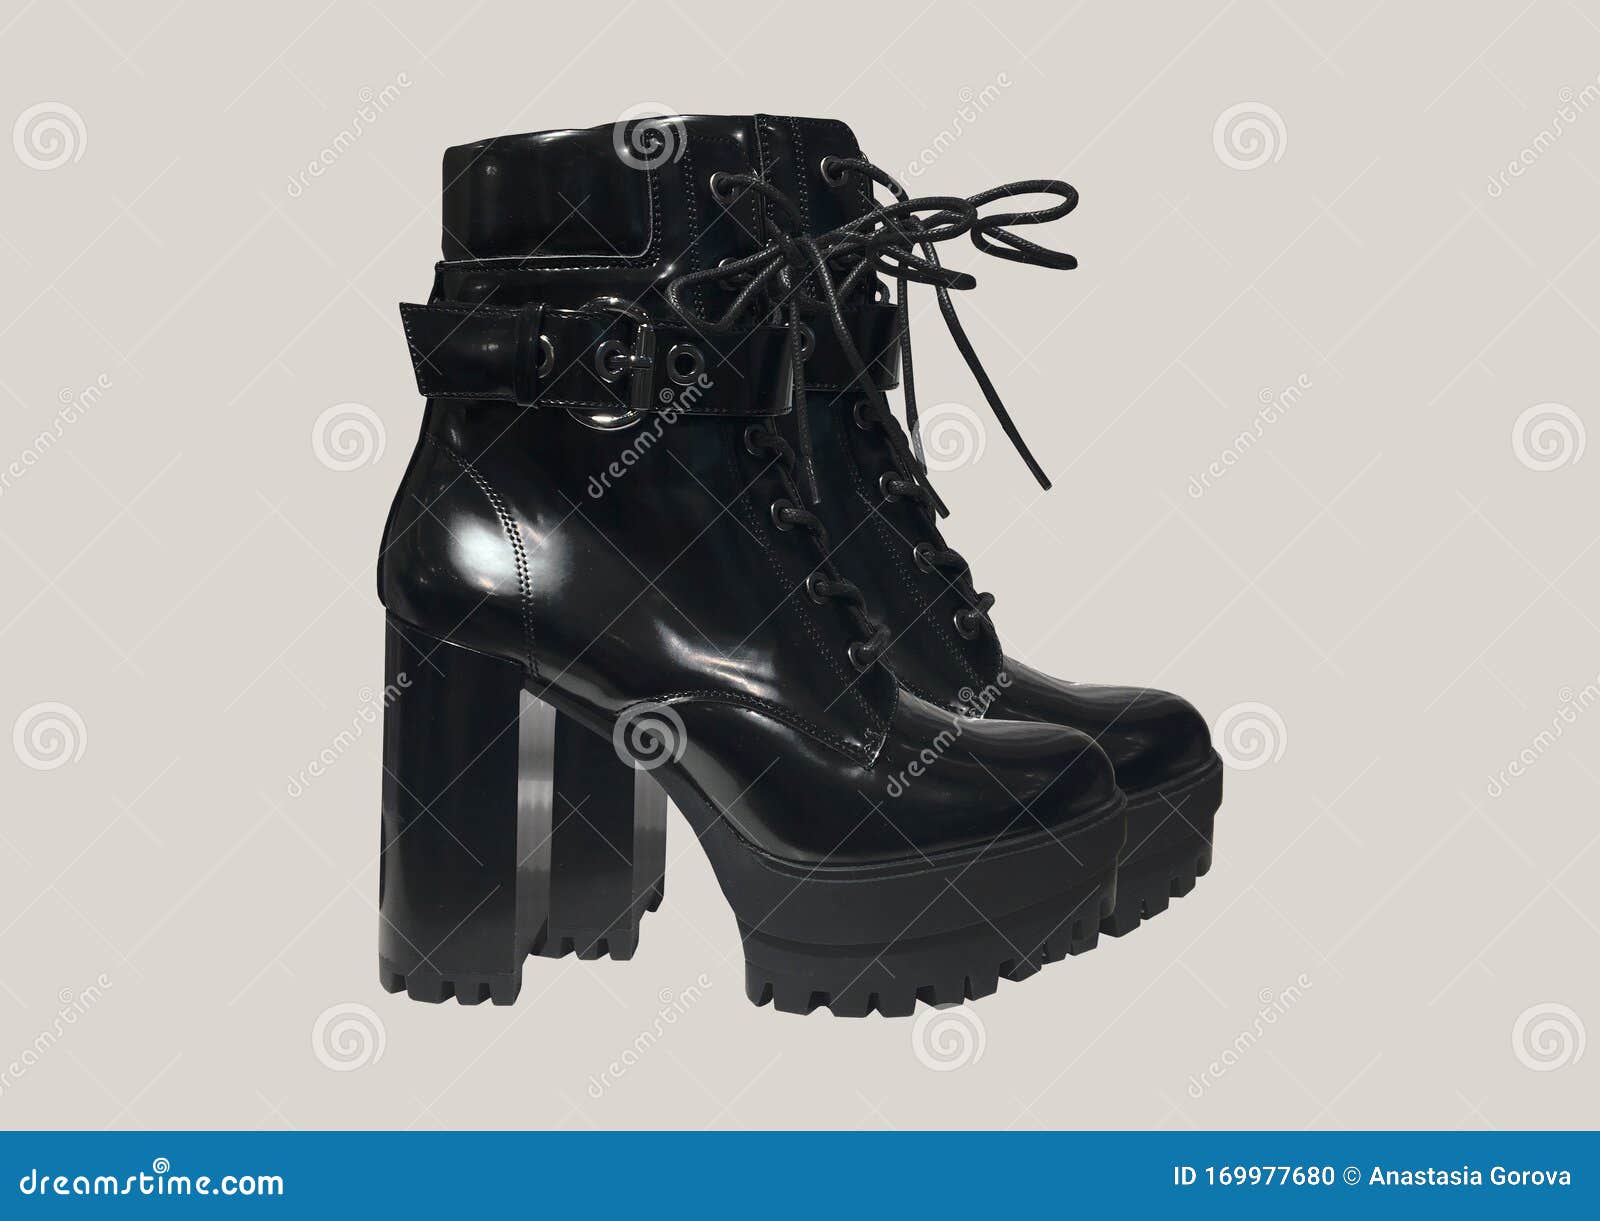 Black Platform High-heel Ankle Boots Stock Photo - Image of environment ...